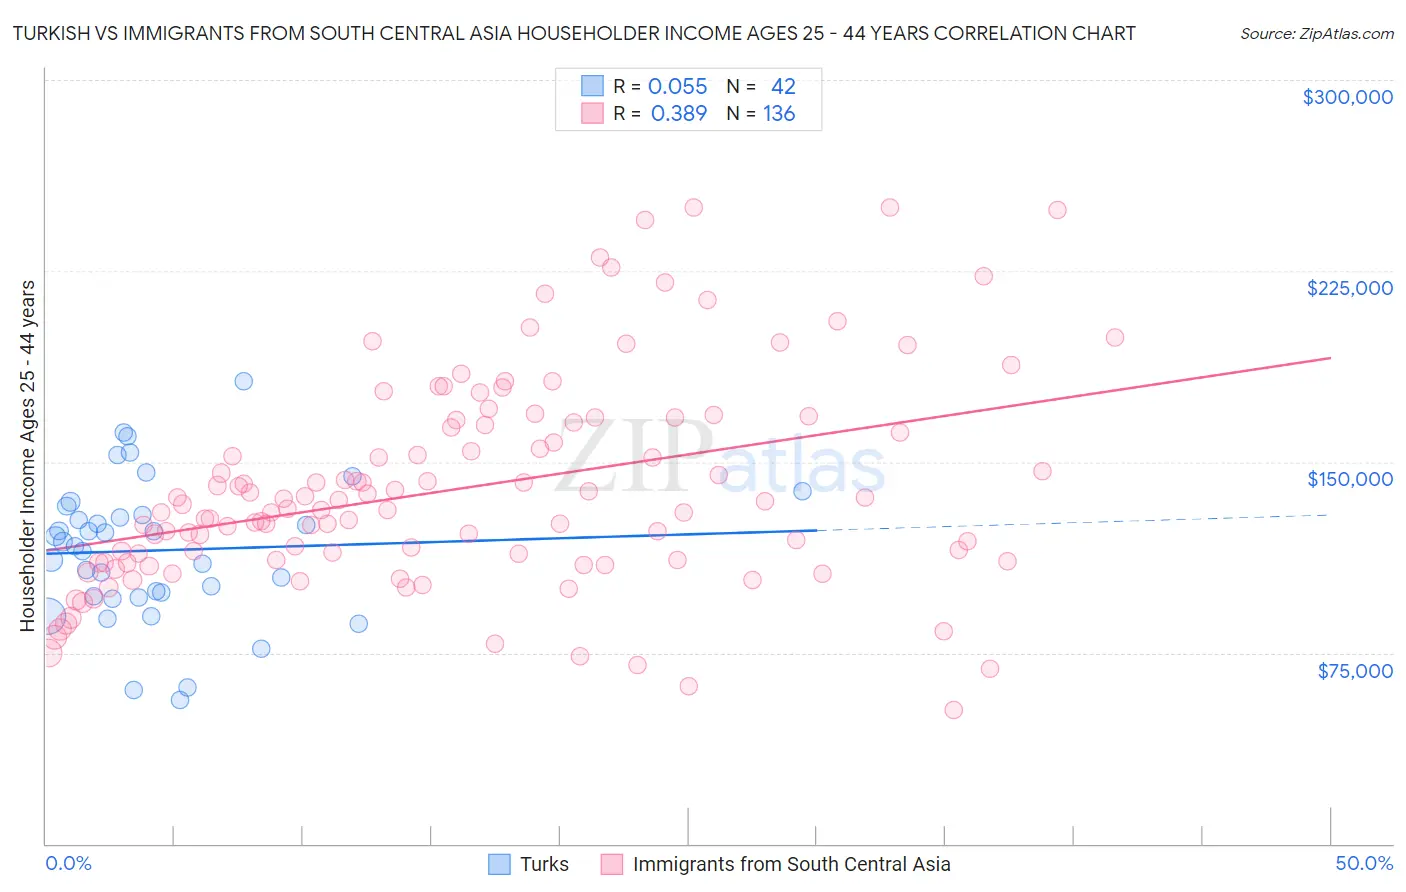 Turkish vs Immigrants from South Central Asia Householder Income Ages 25 - 44 years